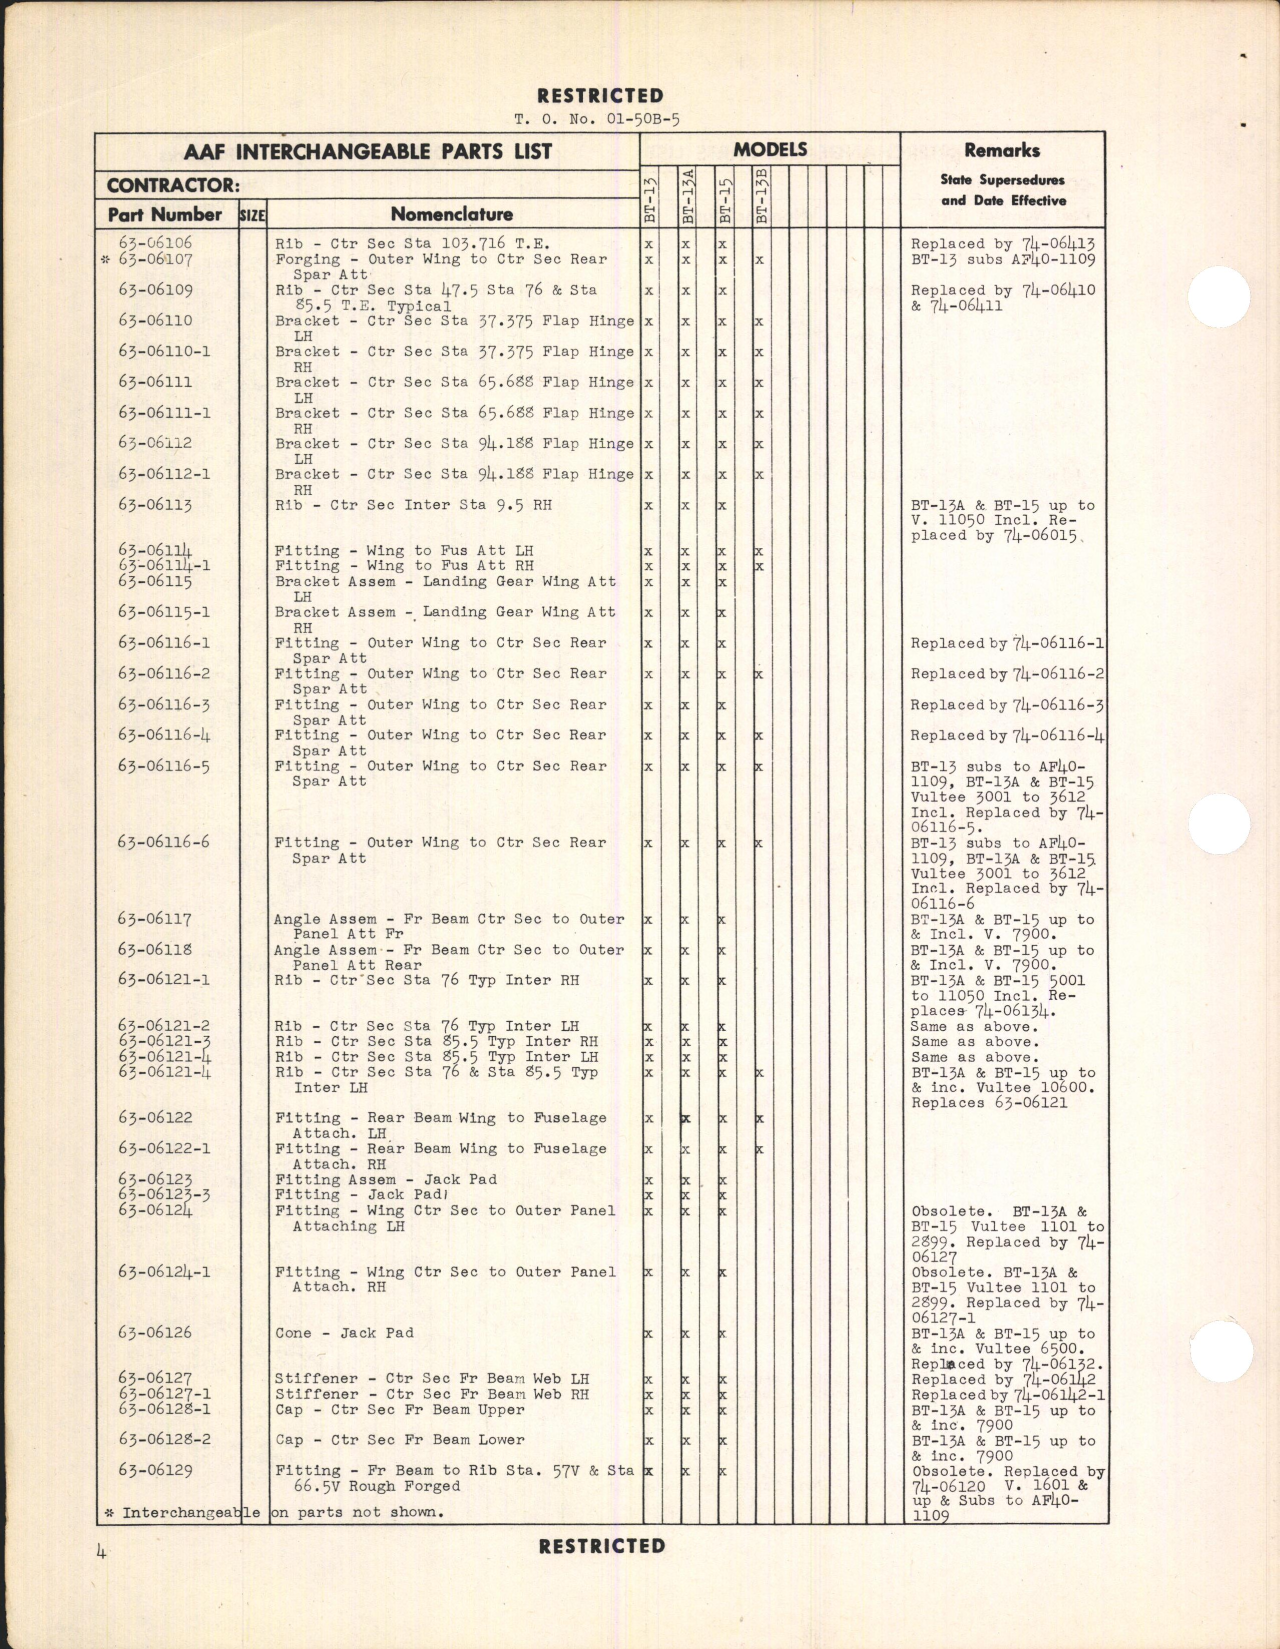 Sample page 8 from AirCorps Library document: Interchangeable Parts Catalog for BT-13, BT-13A, BT-13B, and BT-15 Airplanes